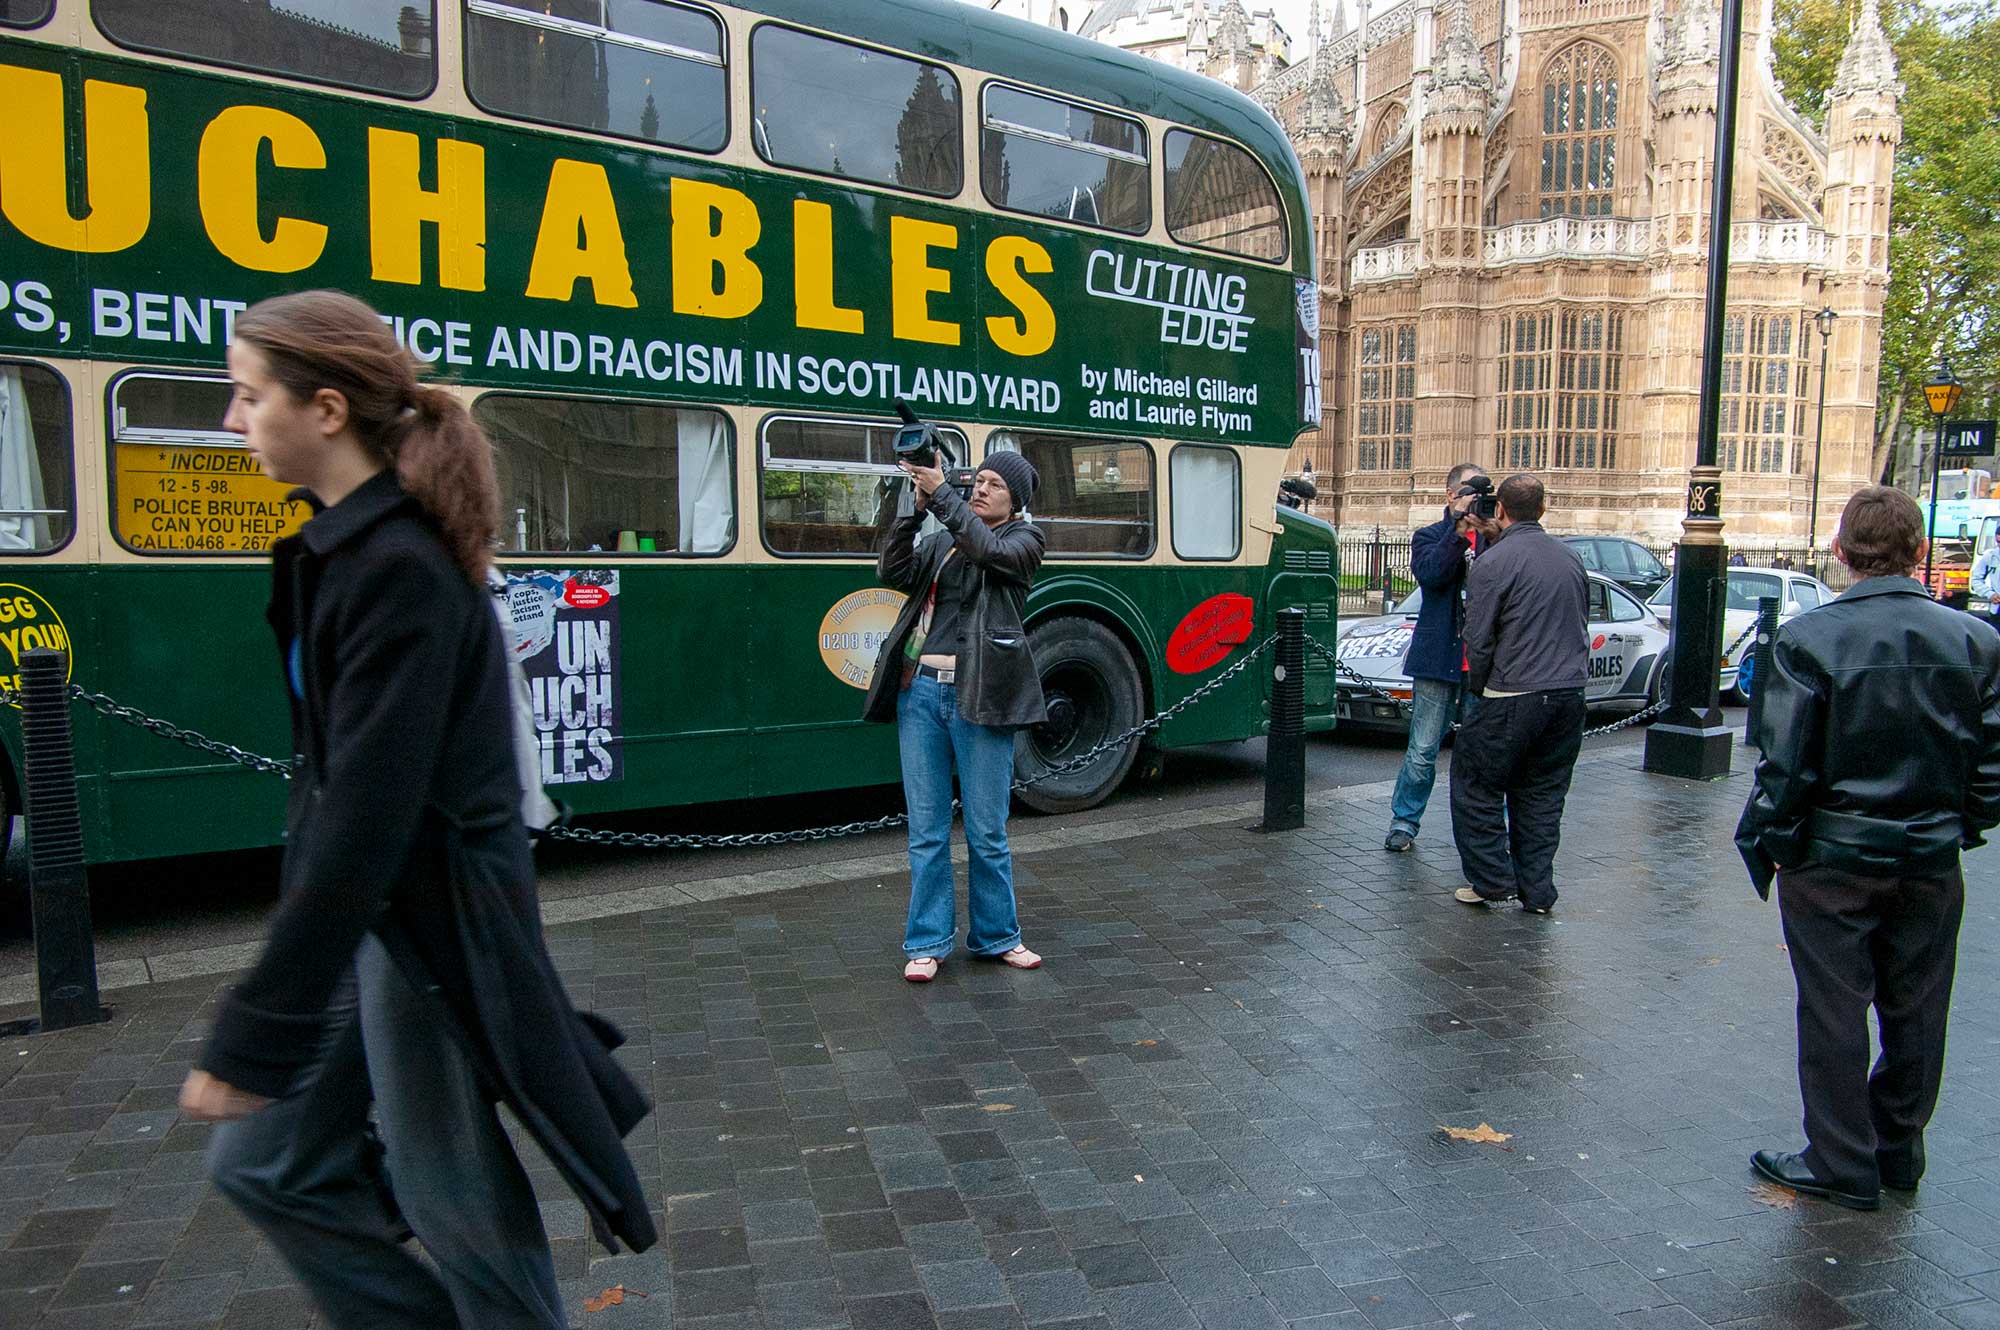 The bus parked prominently outside Parliament, an activity that the government decided would have to become illegal